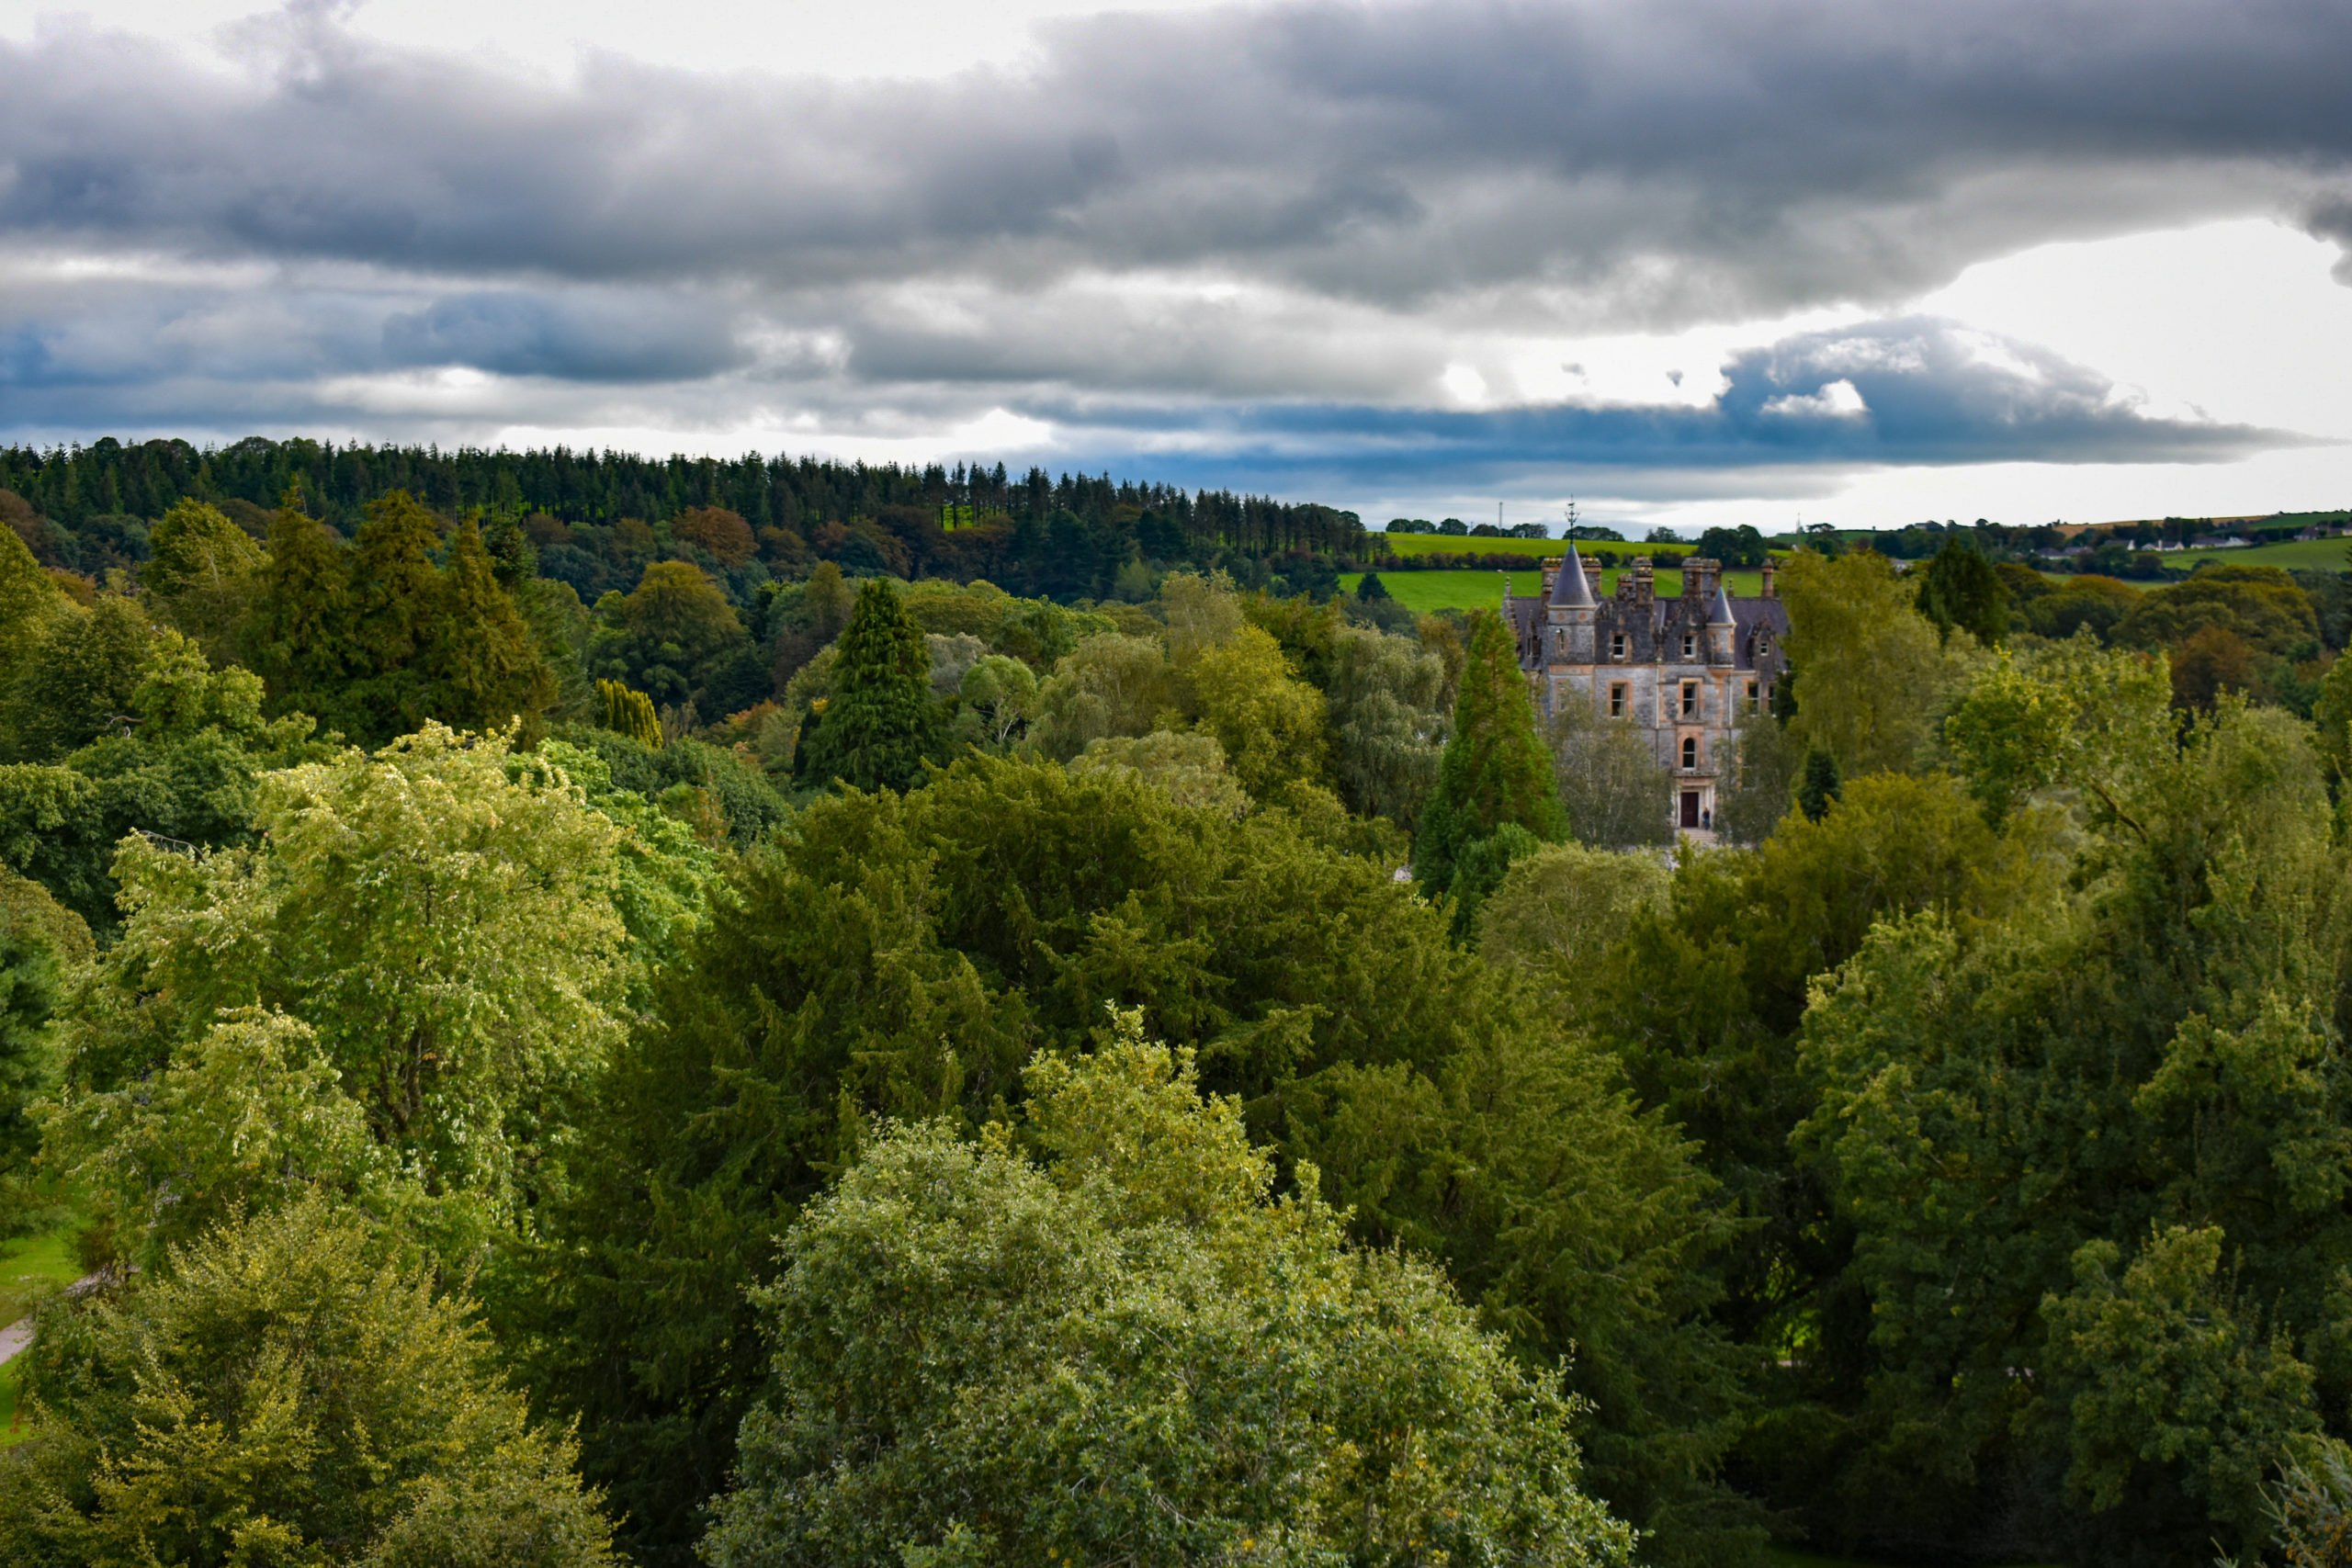 View of Blarney House From On Top of Blarney Castle